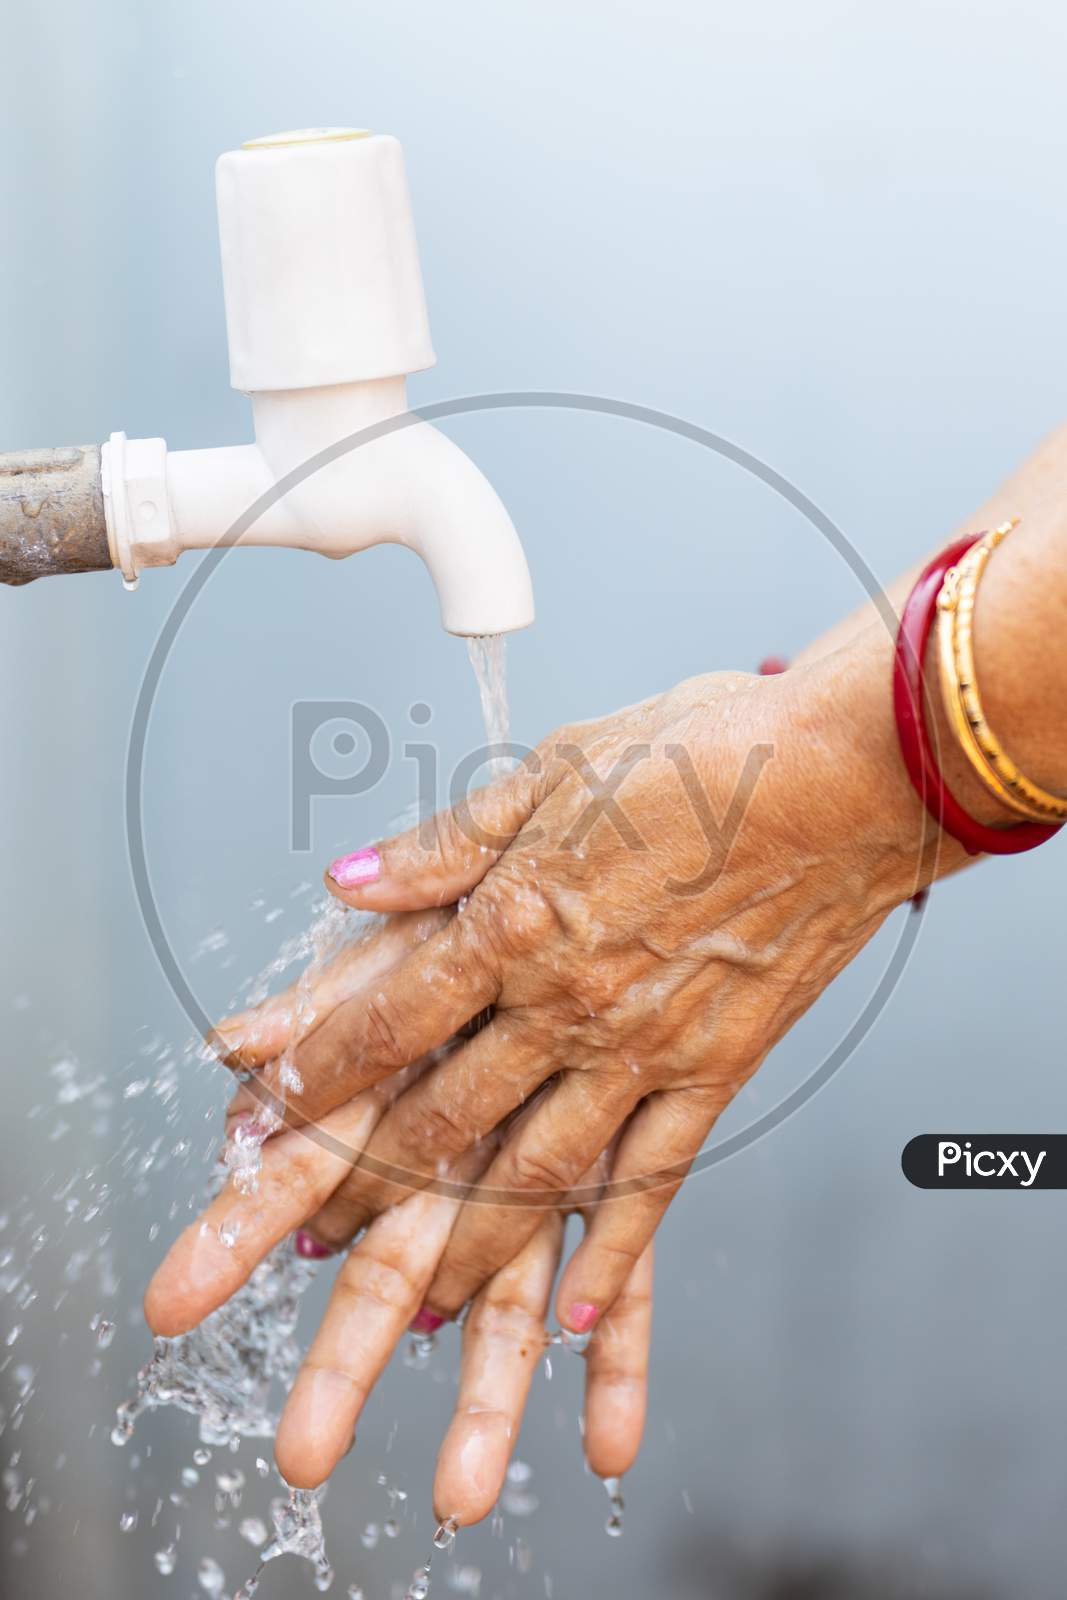 Senior Woman Washing Hand In Tap Water Outdoors